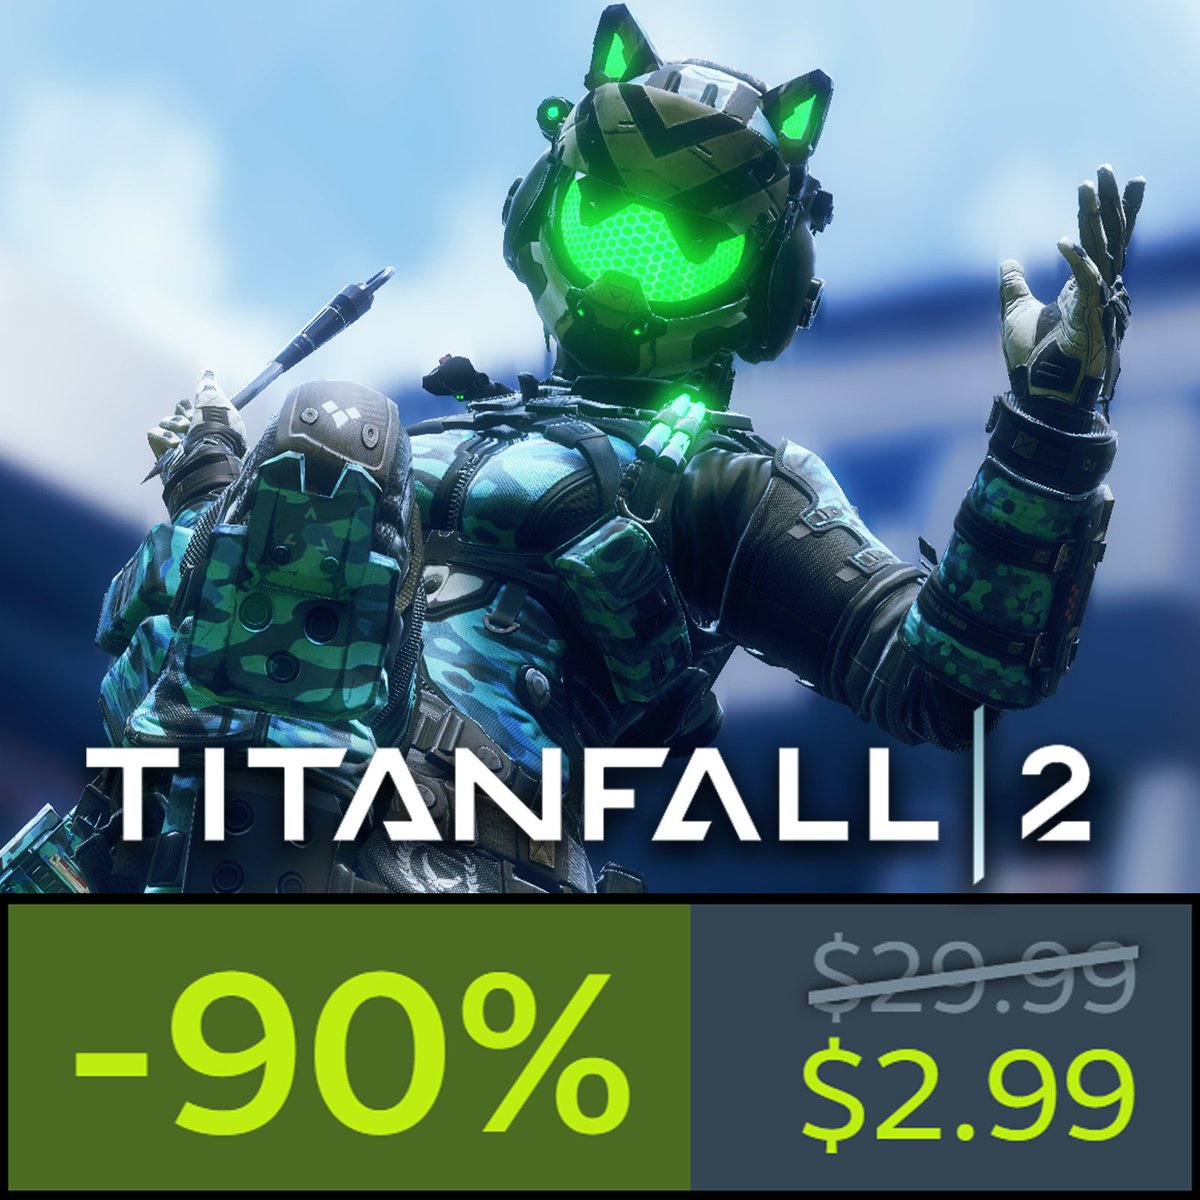 Titanfall 2 is on SALE!
Try out the Northstar client!!!

Sale ends May 29th